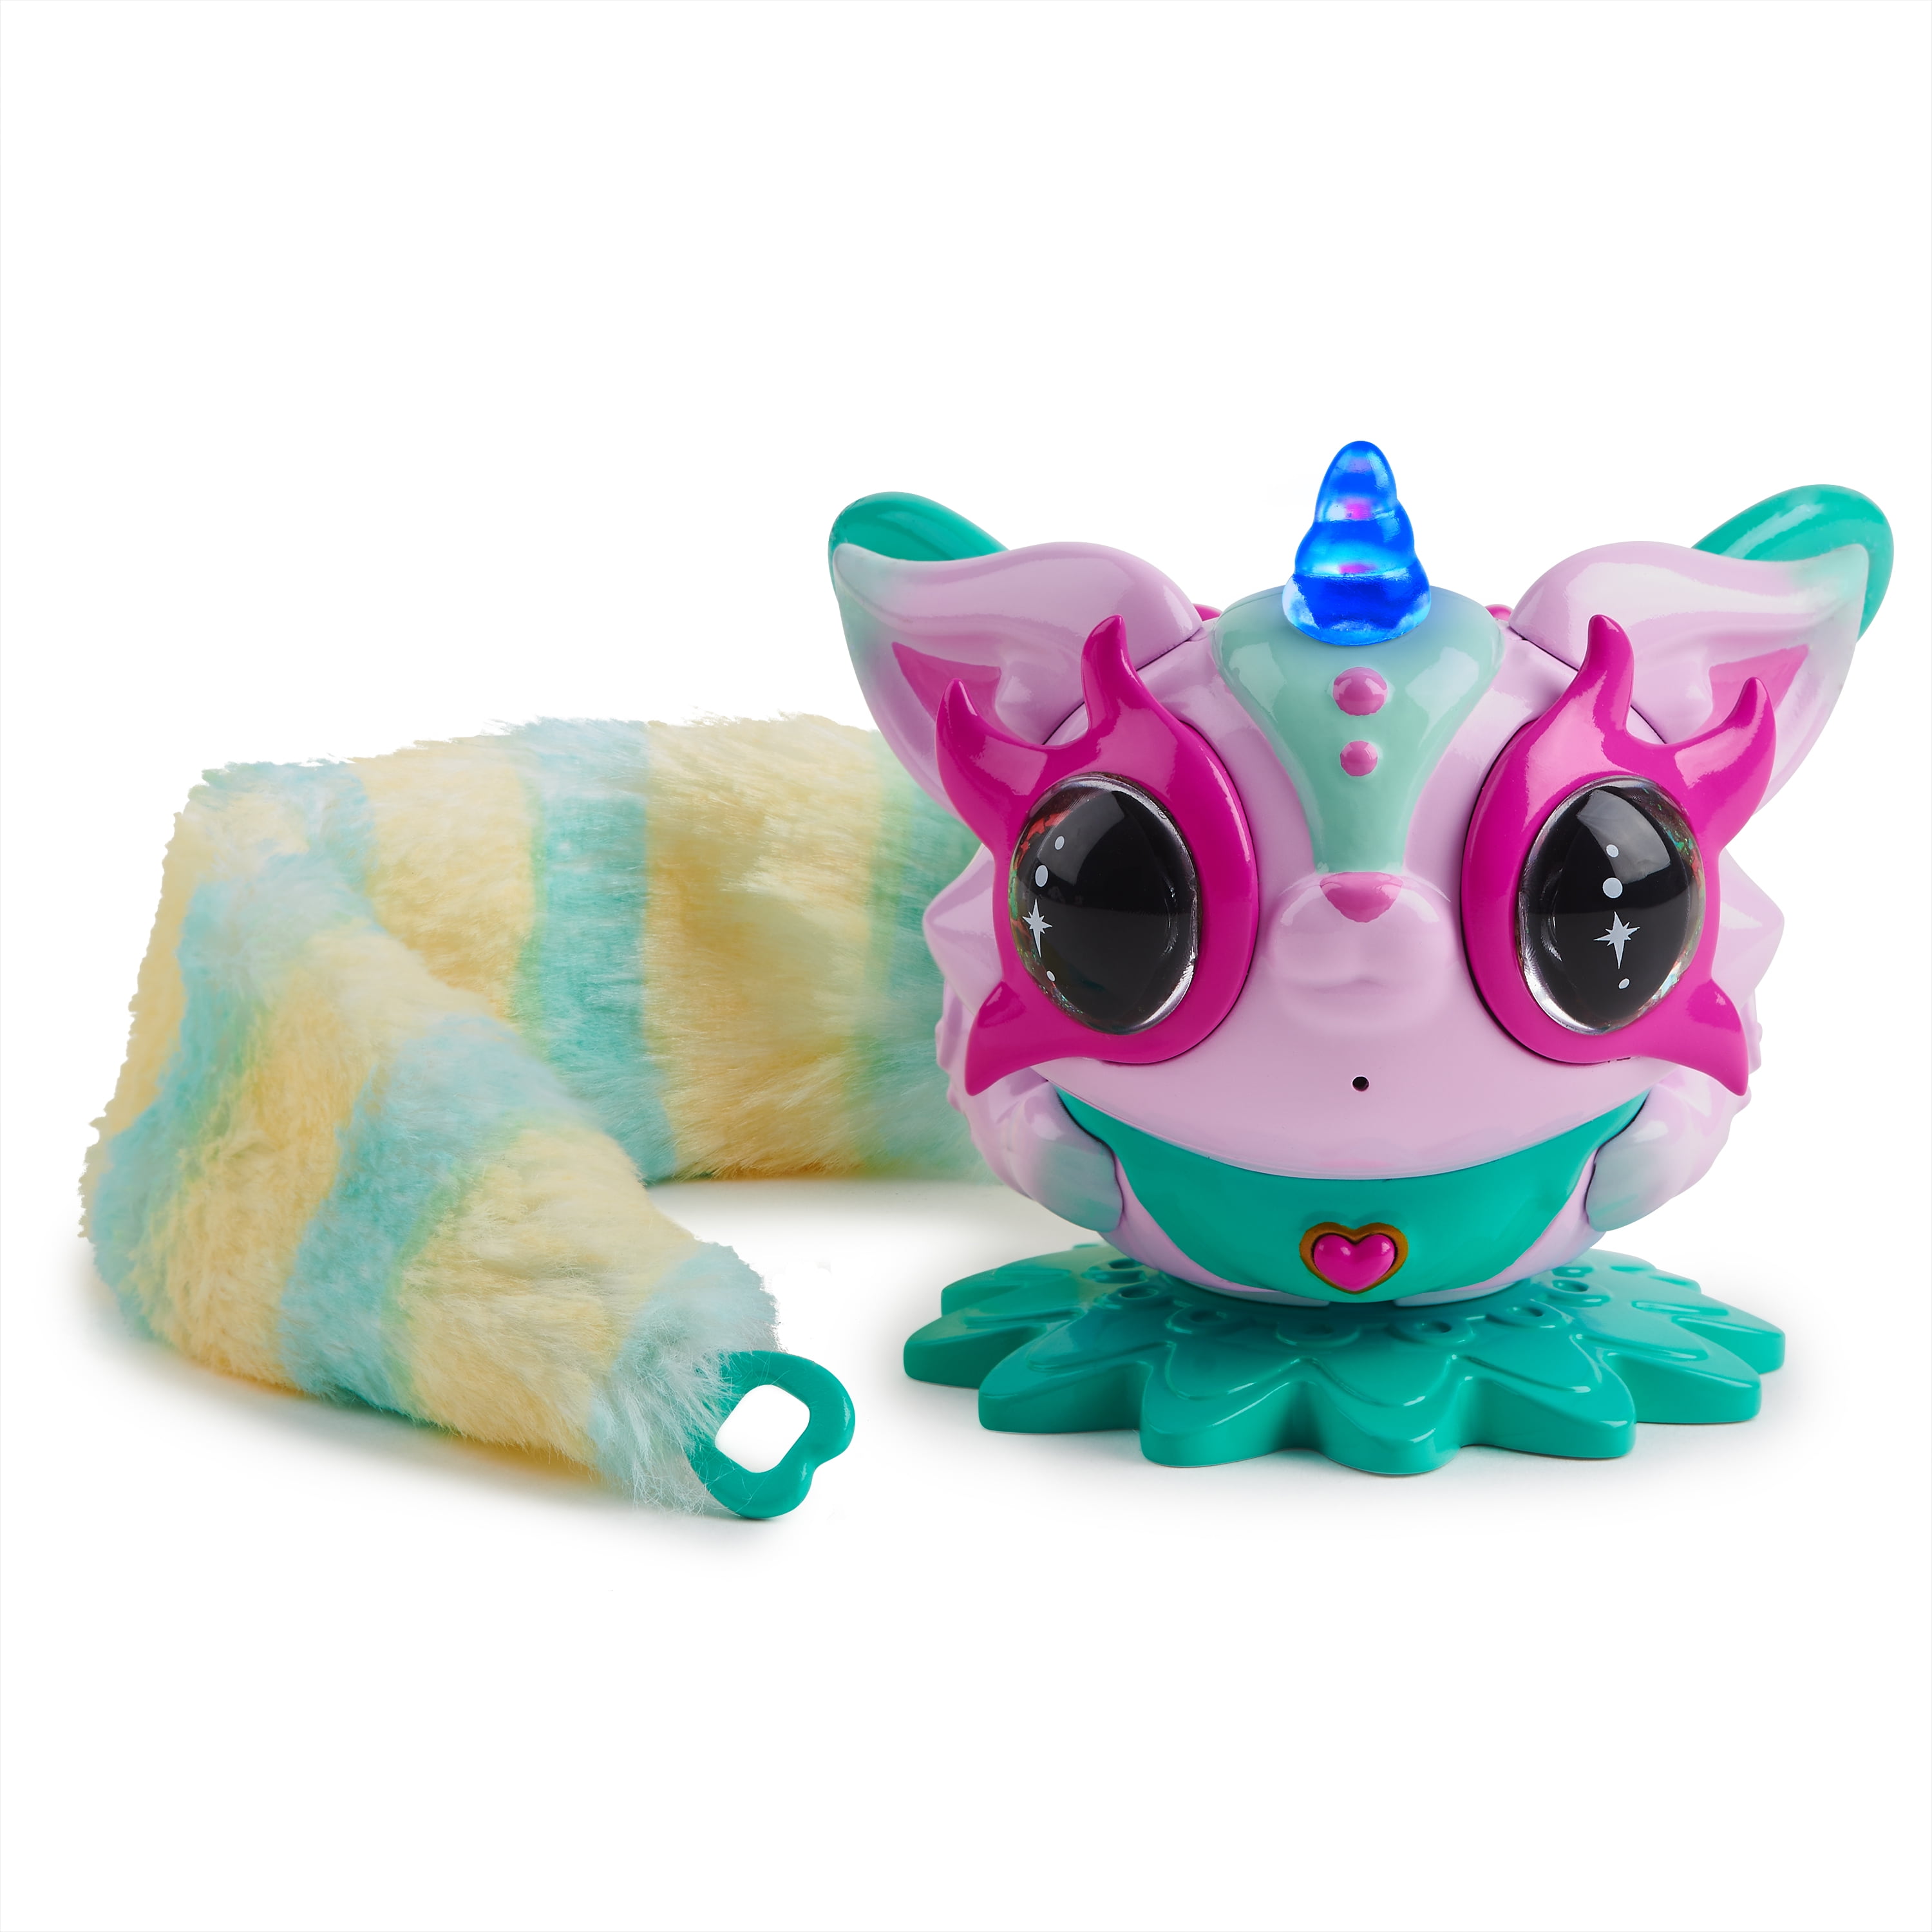 WowWee Pixie ️ Belles Layla Purple Interactive Animal Toy Wearable Ages 5 for sale online 